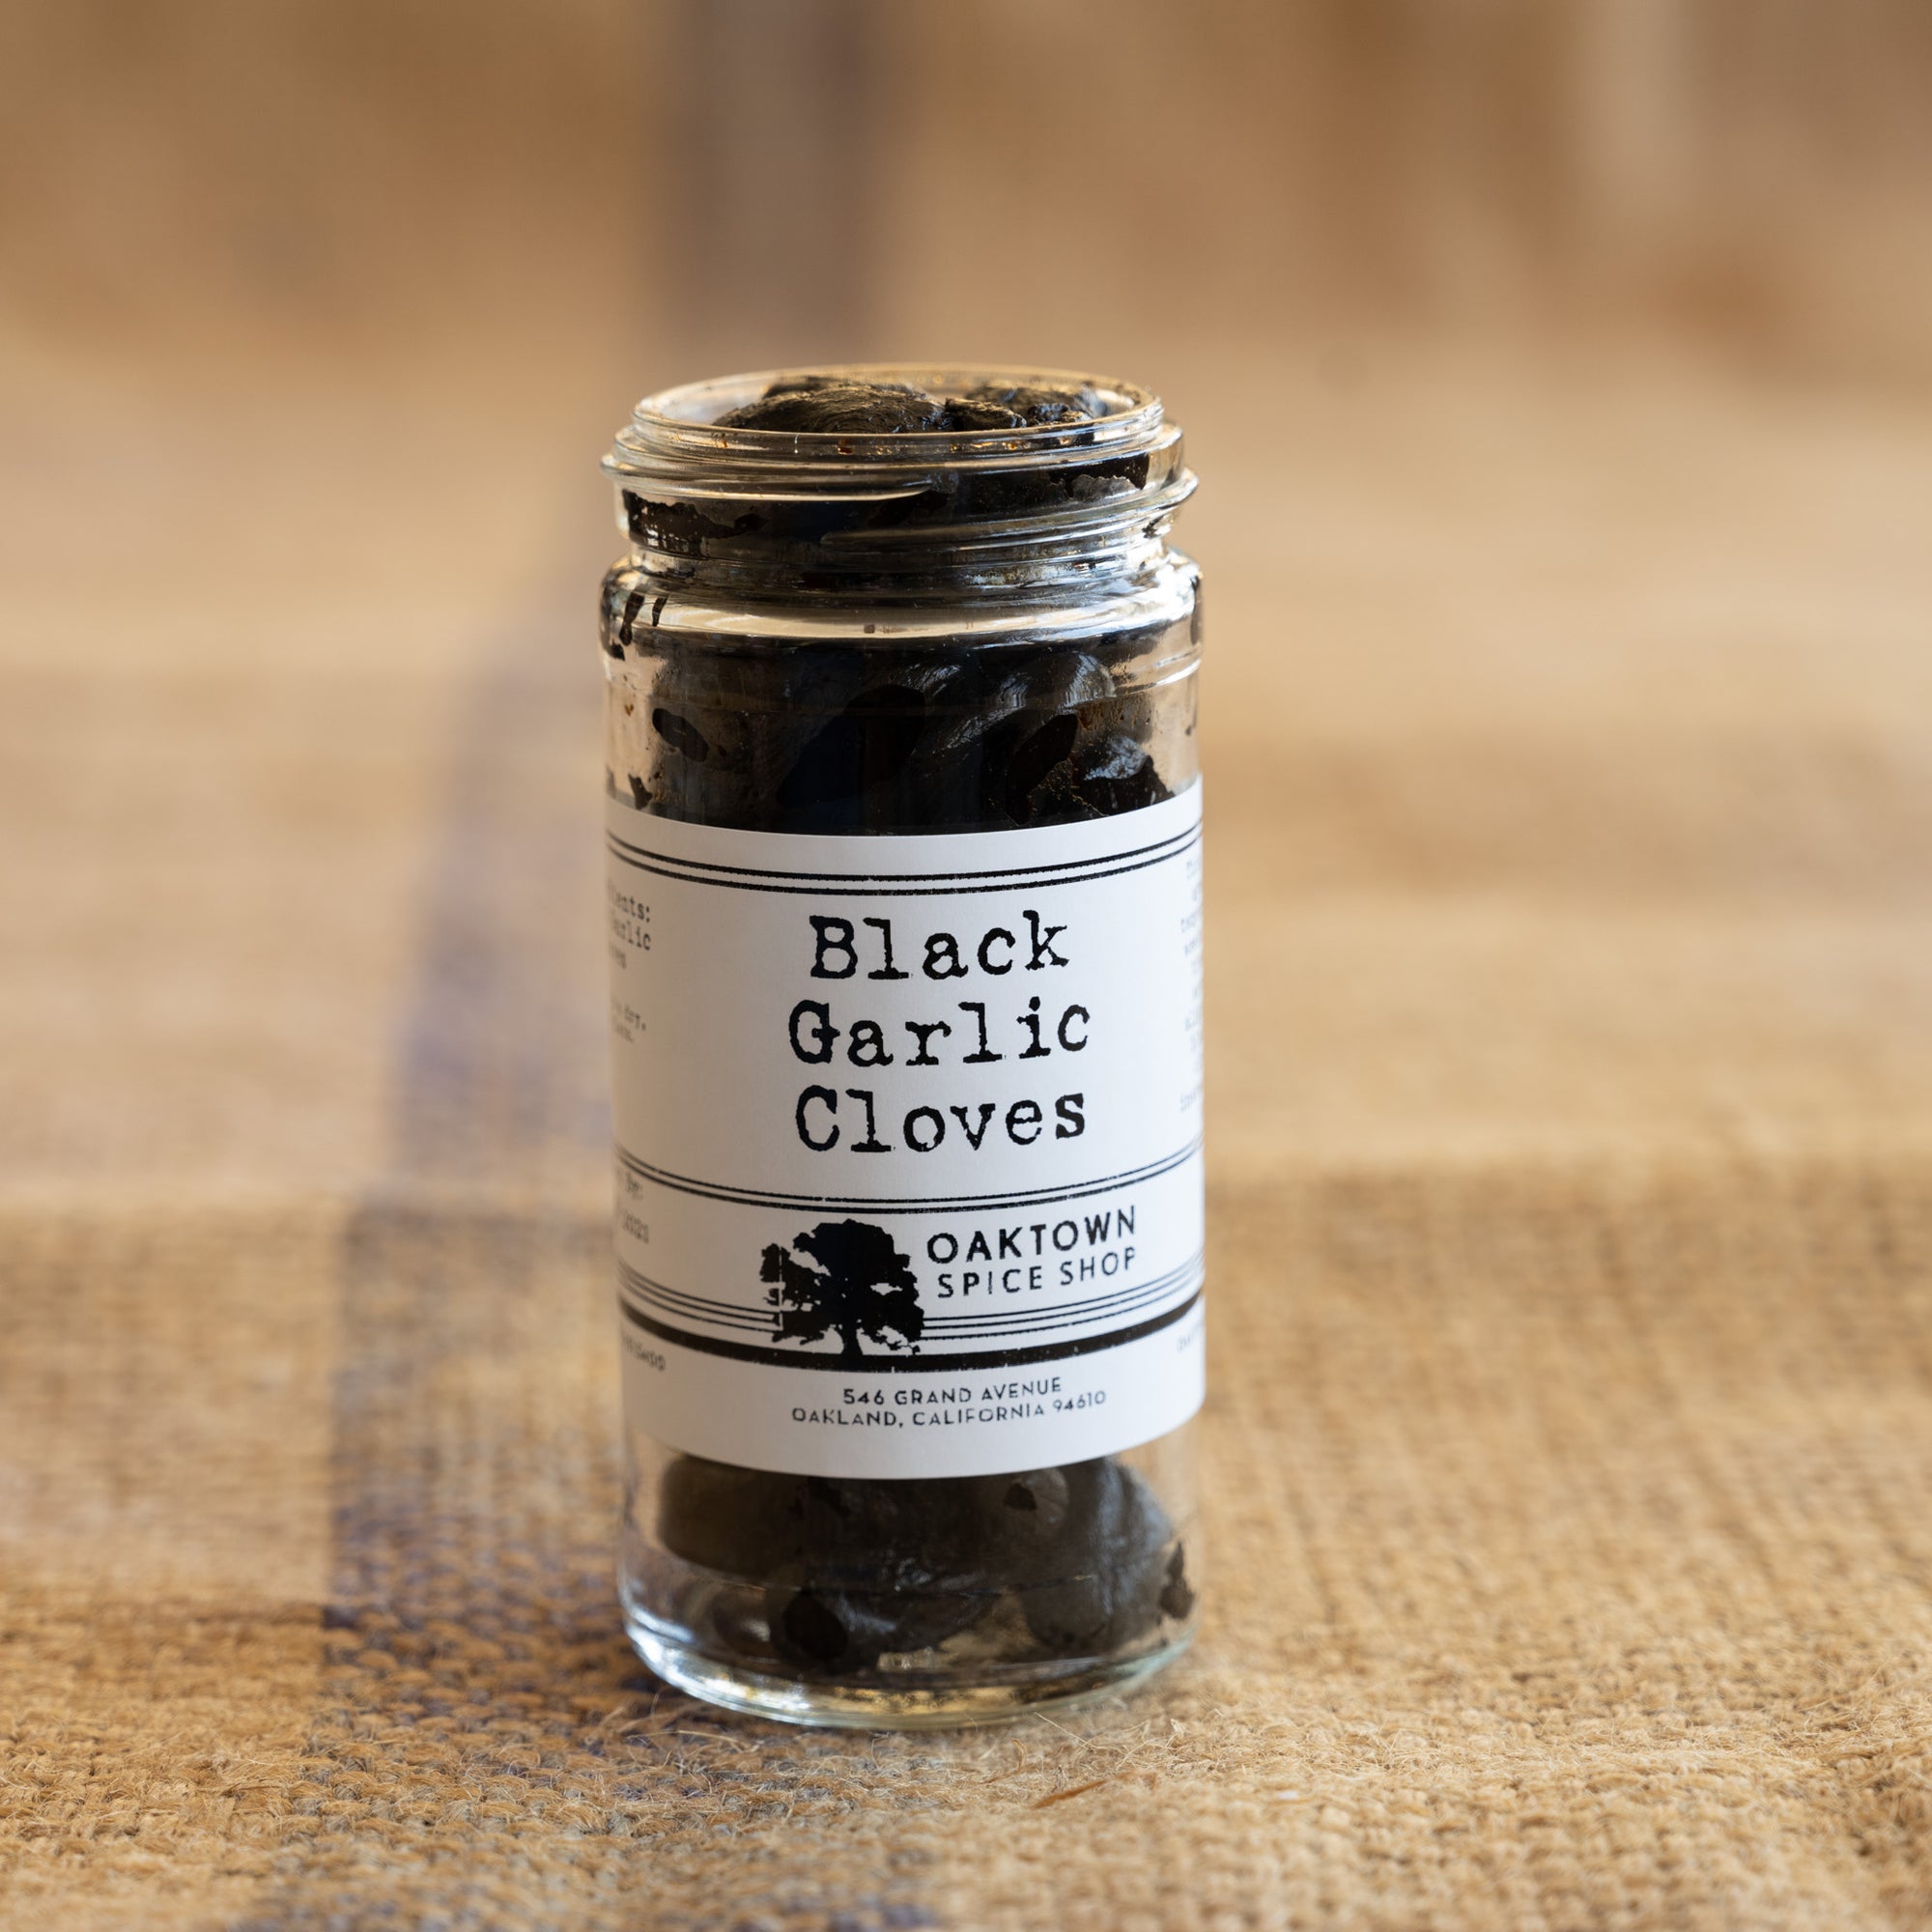 Whole Black Garlic Cloves Aged at low temperatures for weeks to create a sweet and savory and slightly funky flavor from Oaktown Spice Shop